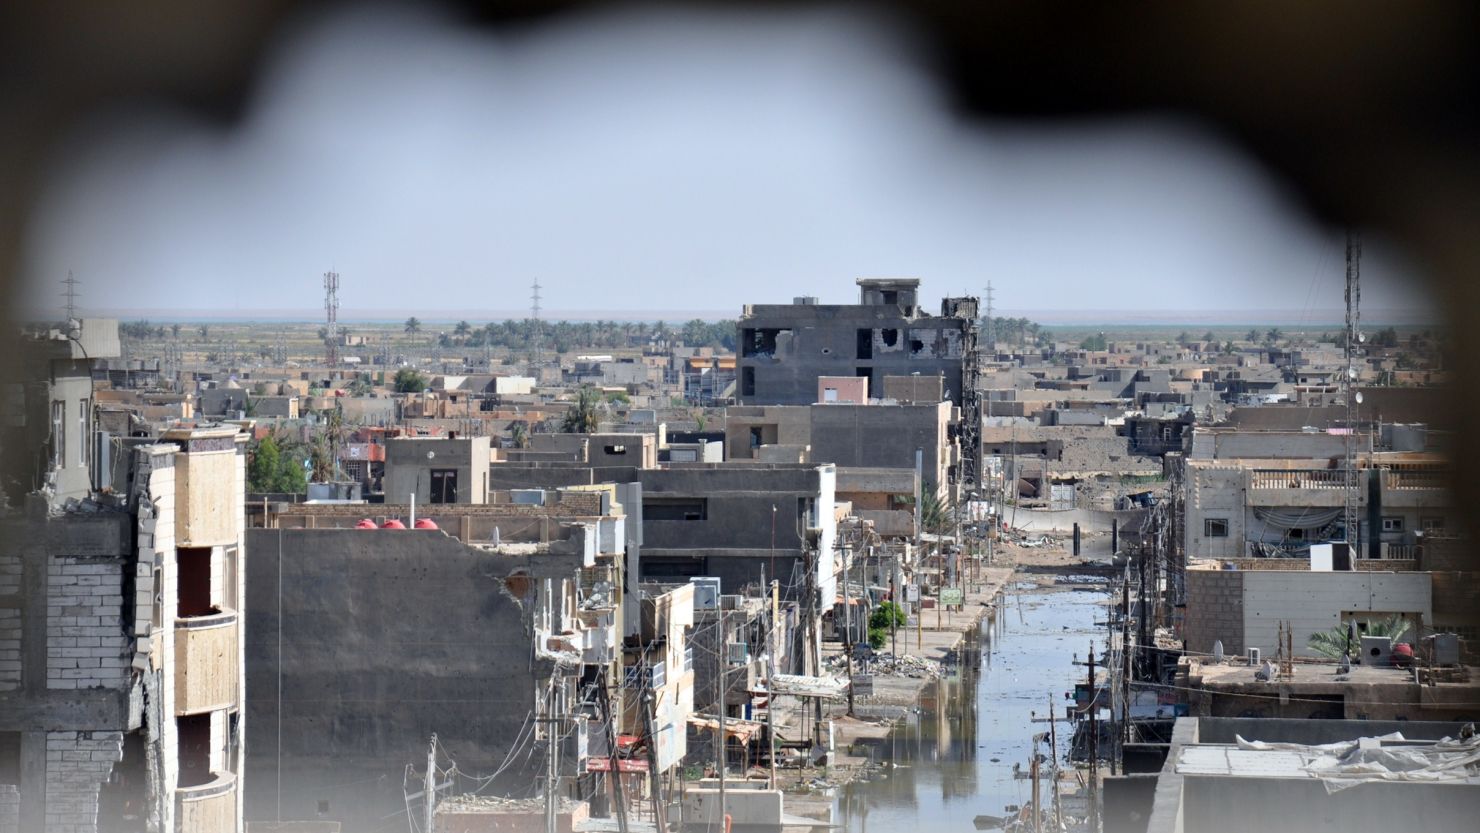 Taken through a hole in a wall, this file photo from June 2014 shows the damage caused by conflict between government forces and anti-government militants in the Anbar capital of Ramadi in Iraq.